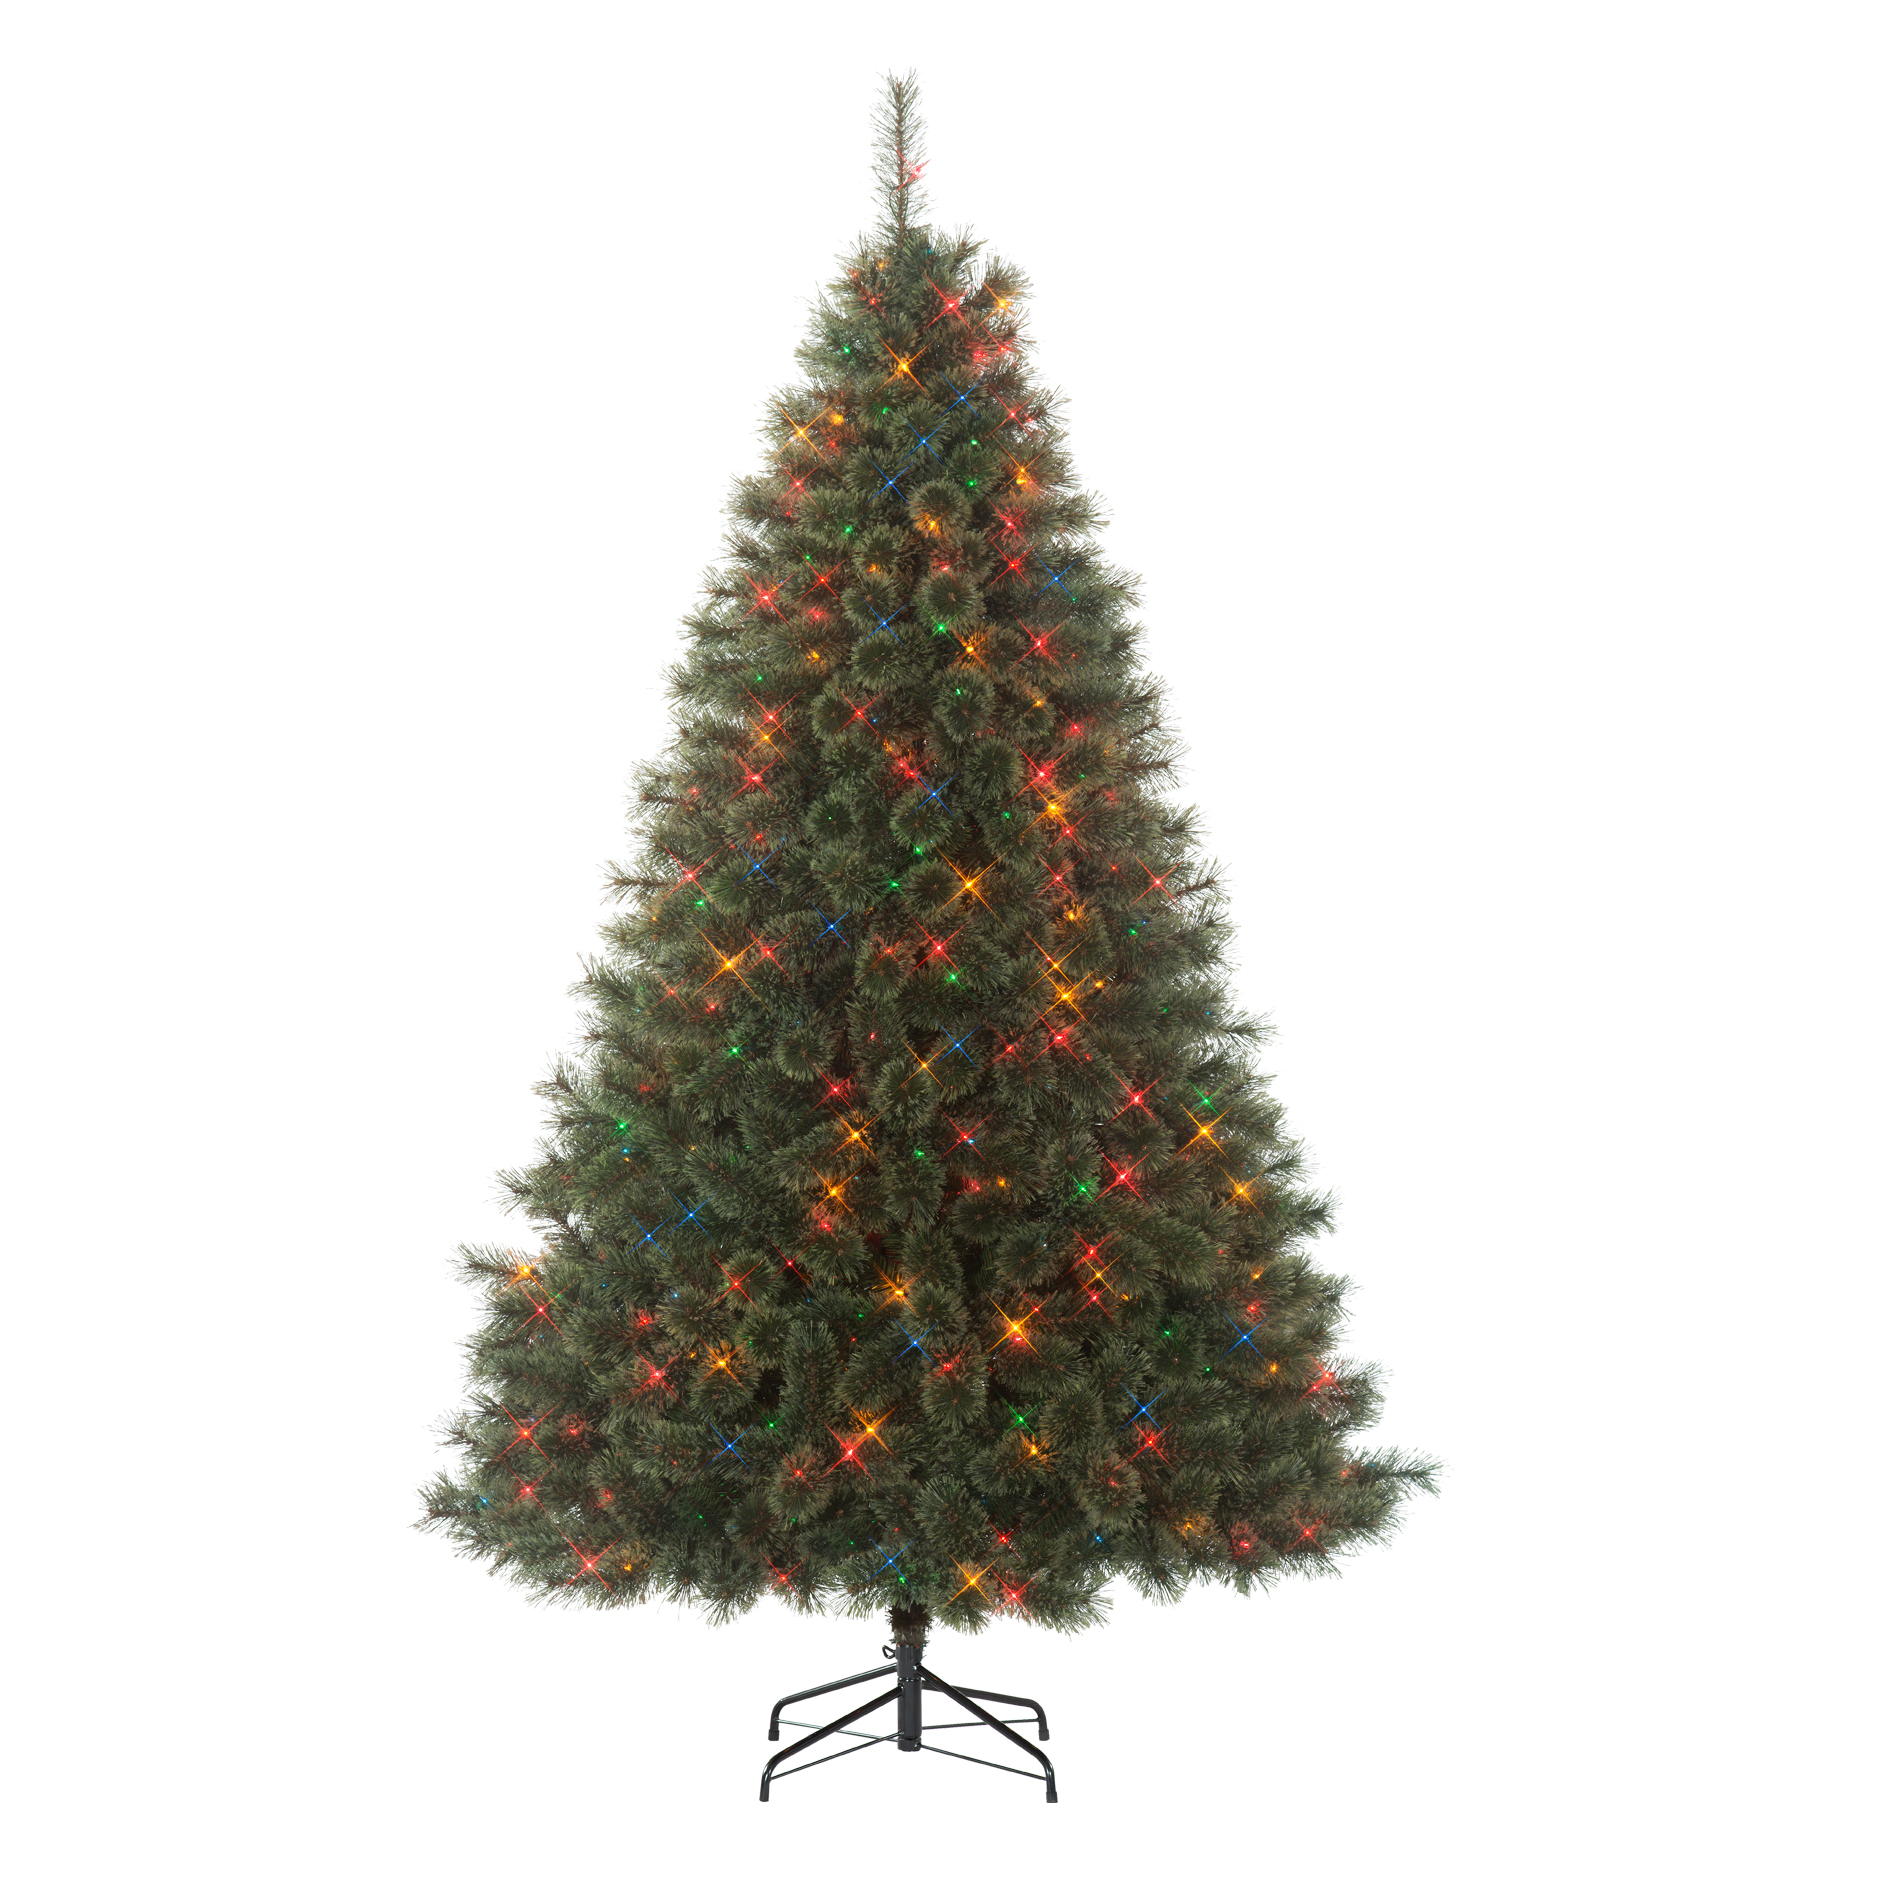 50% OFF Jaclyn Smith Cashmere Christmas Trees! (From $64.99 for 7′)